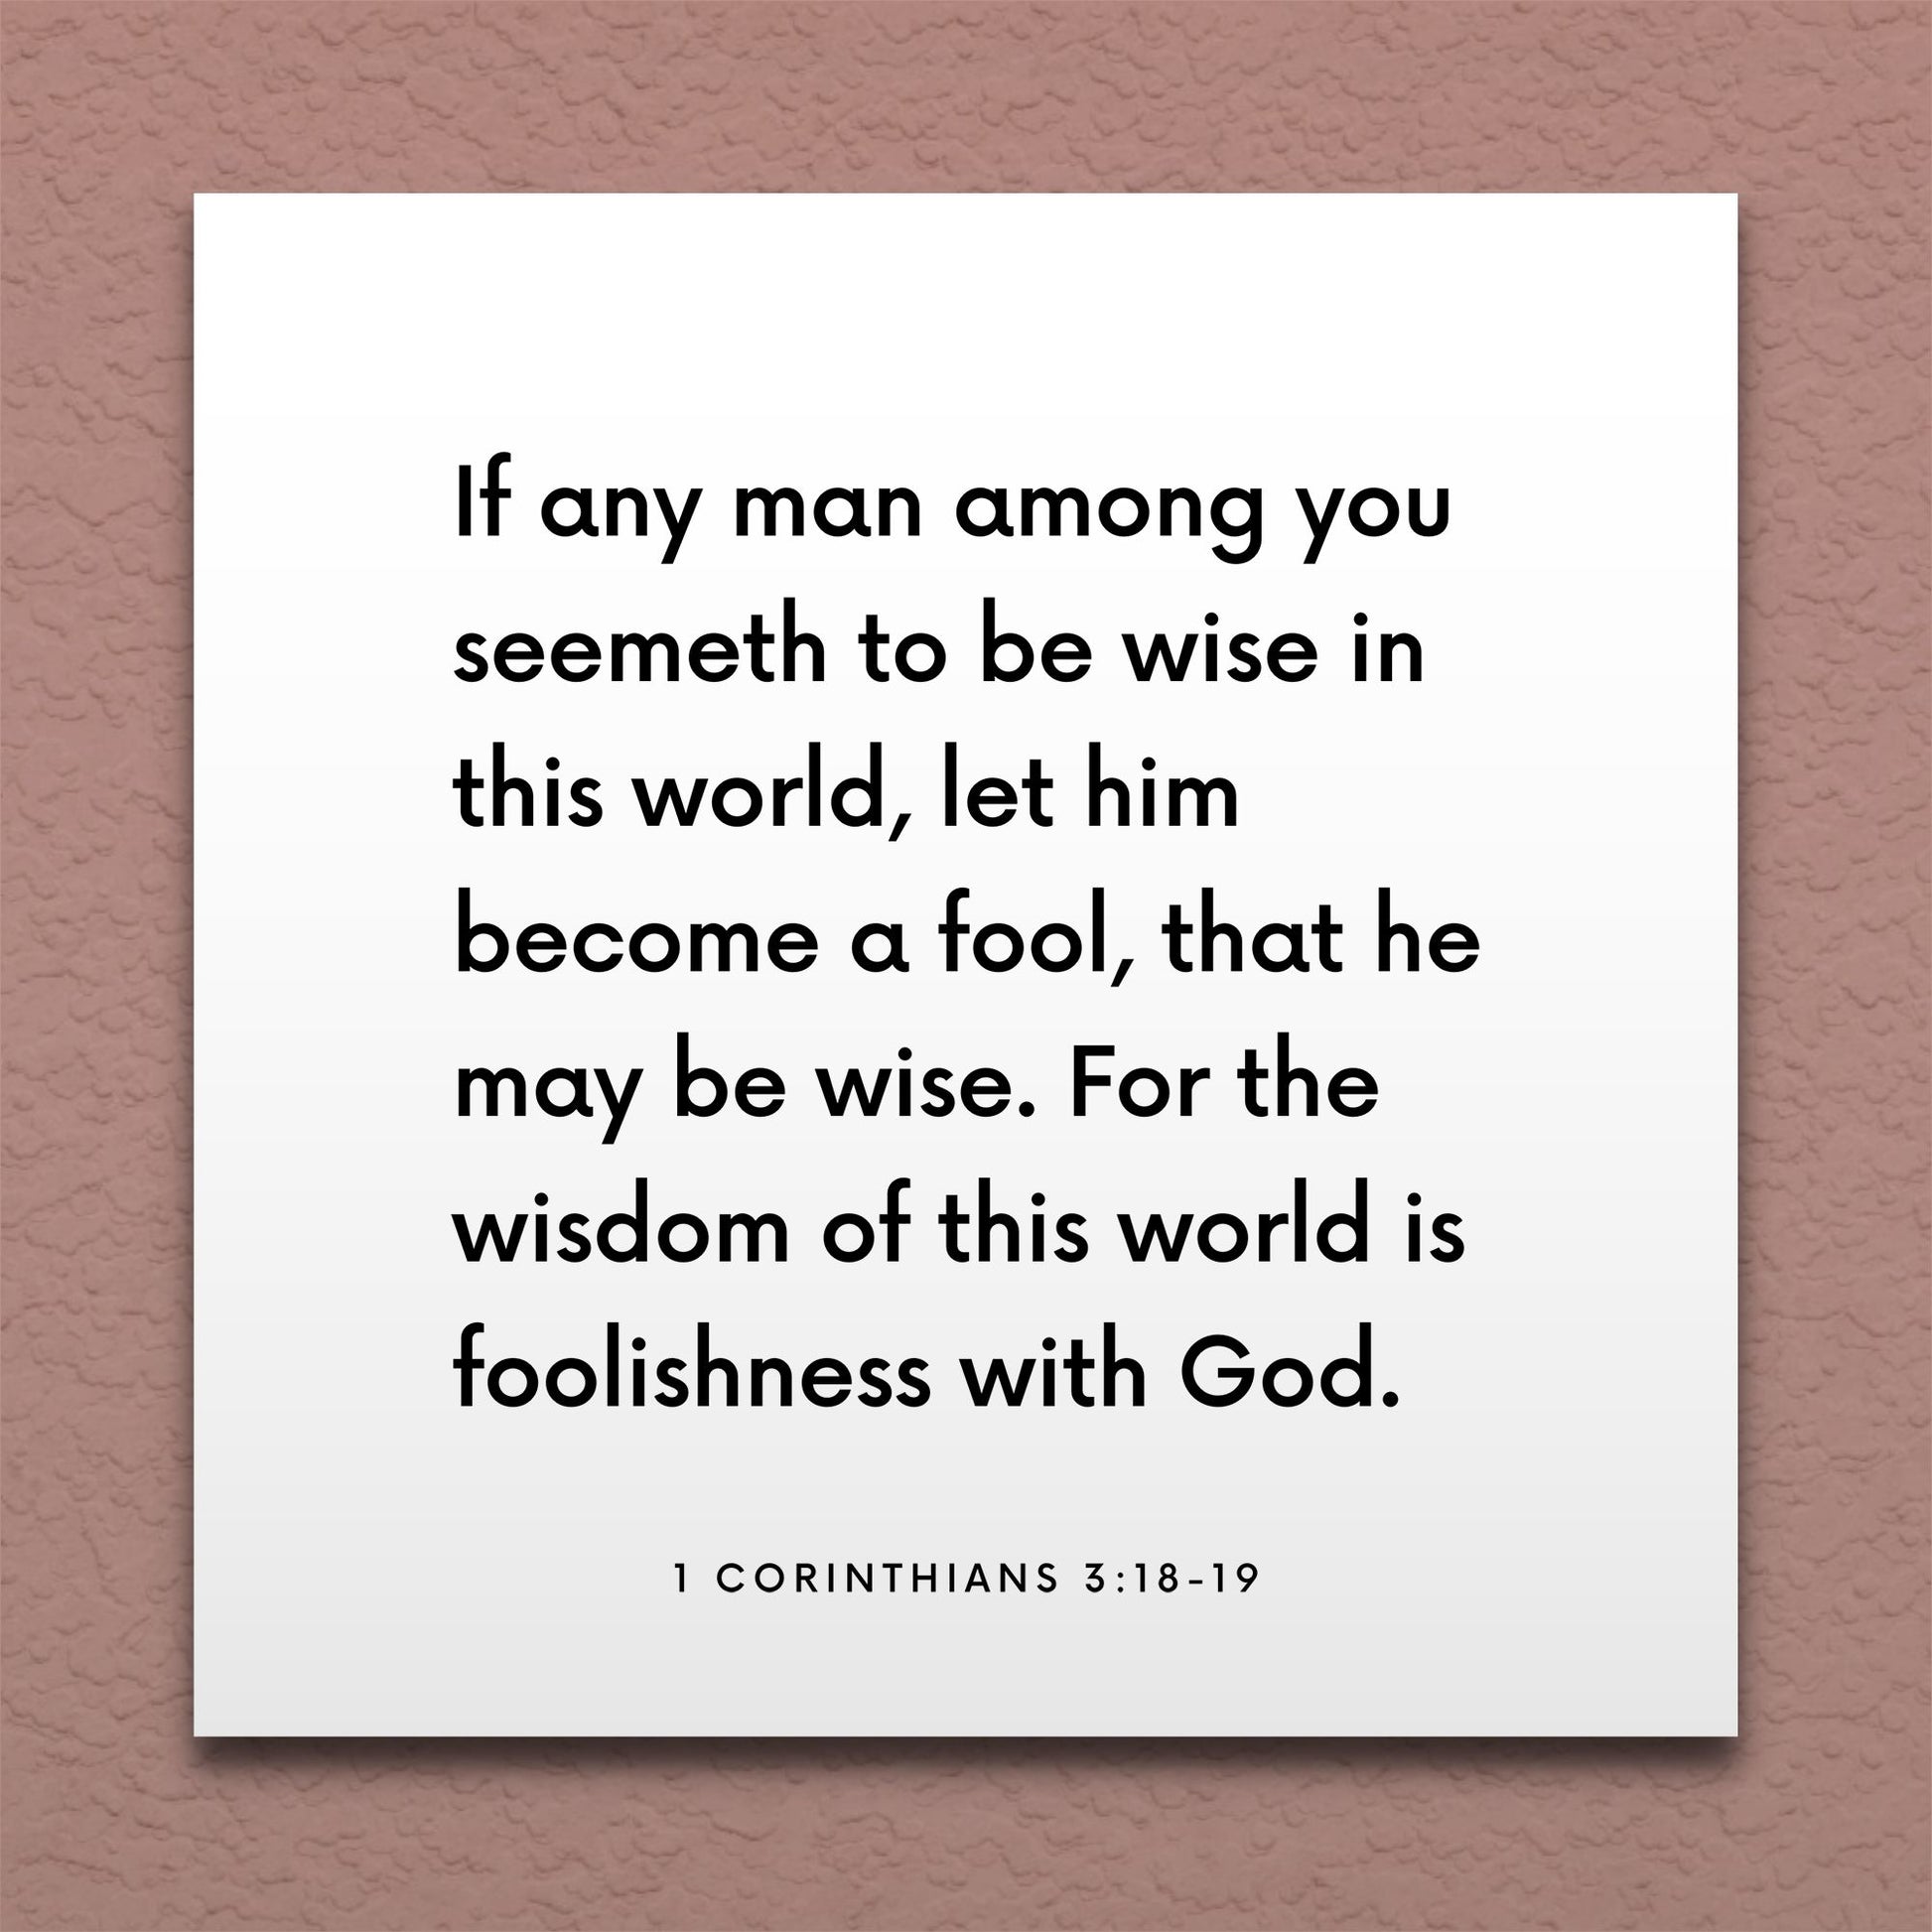 Wall-mounted scripture tile for 1 Corinthians 3:18-19 - "The wisdom of this world is foolishness with God"